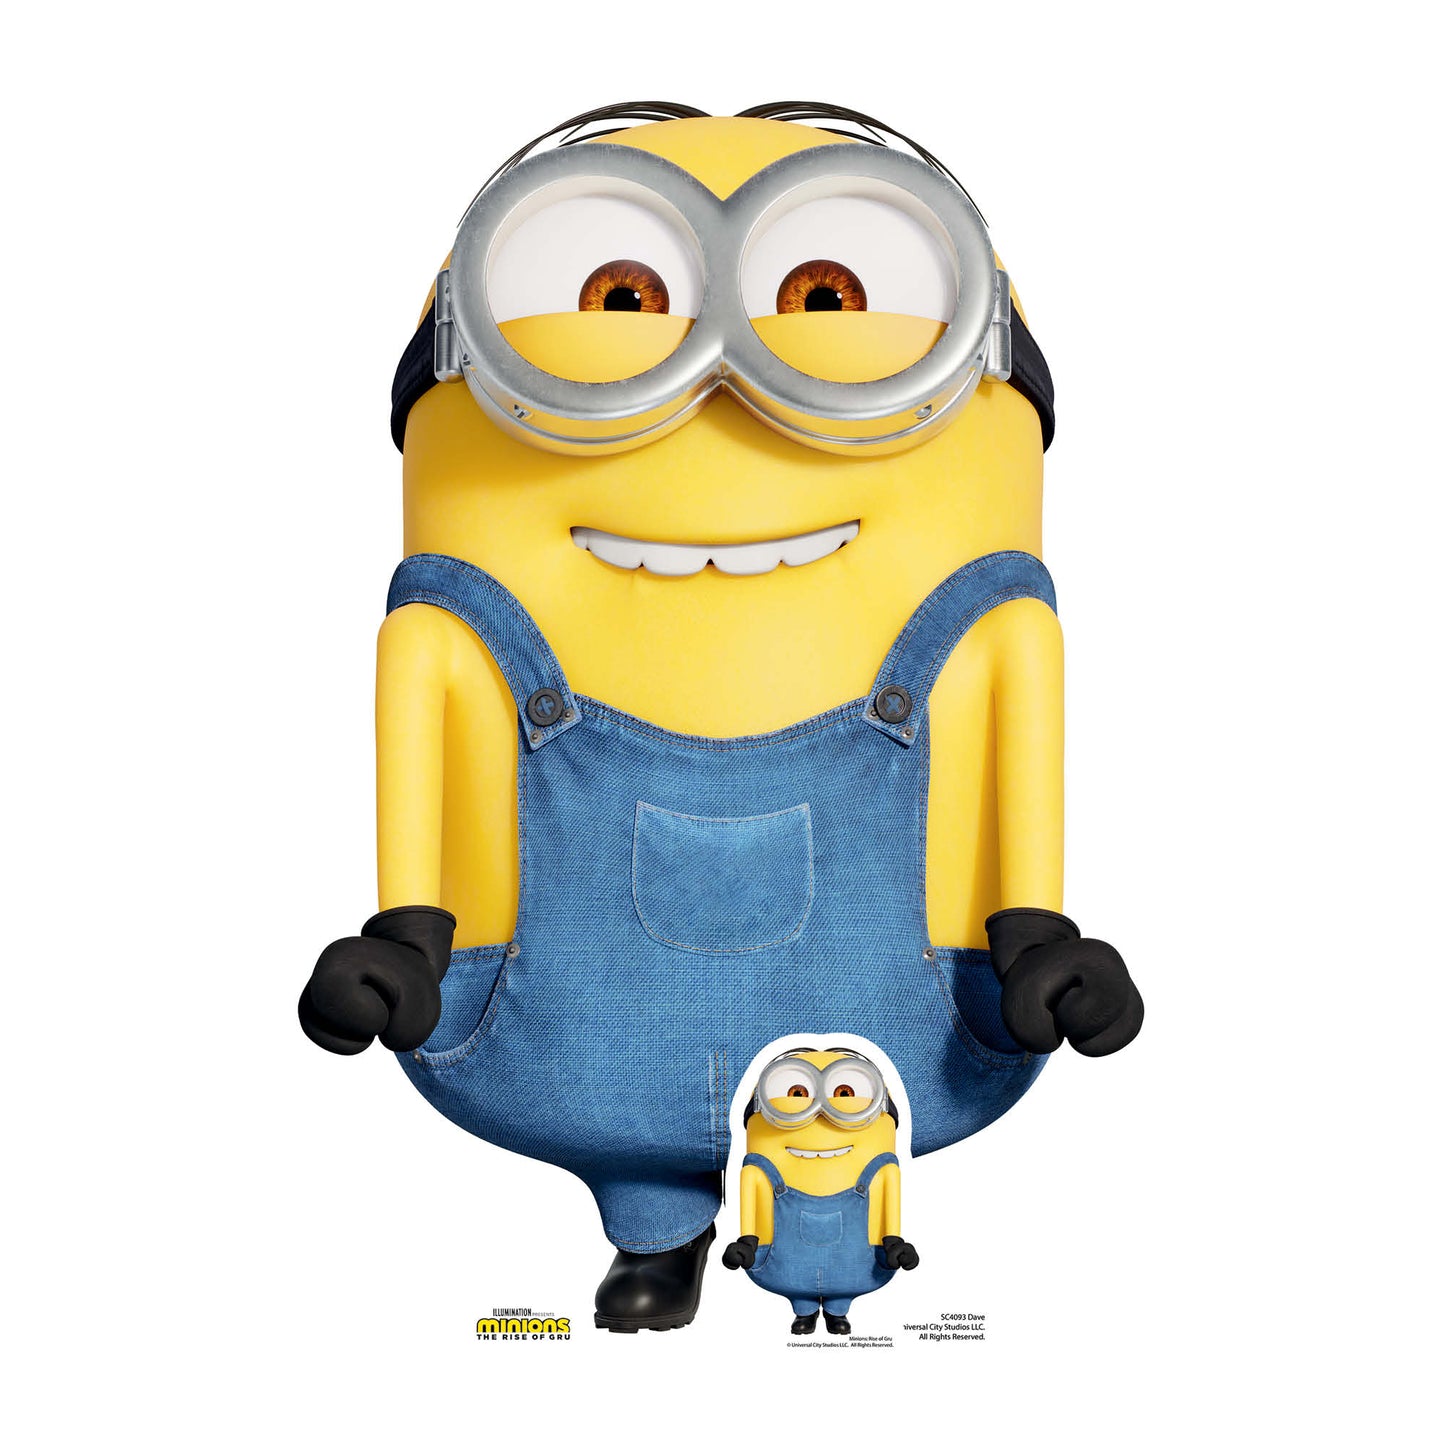 Dave Excited Minions Cardboard Cutout